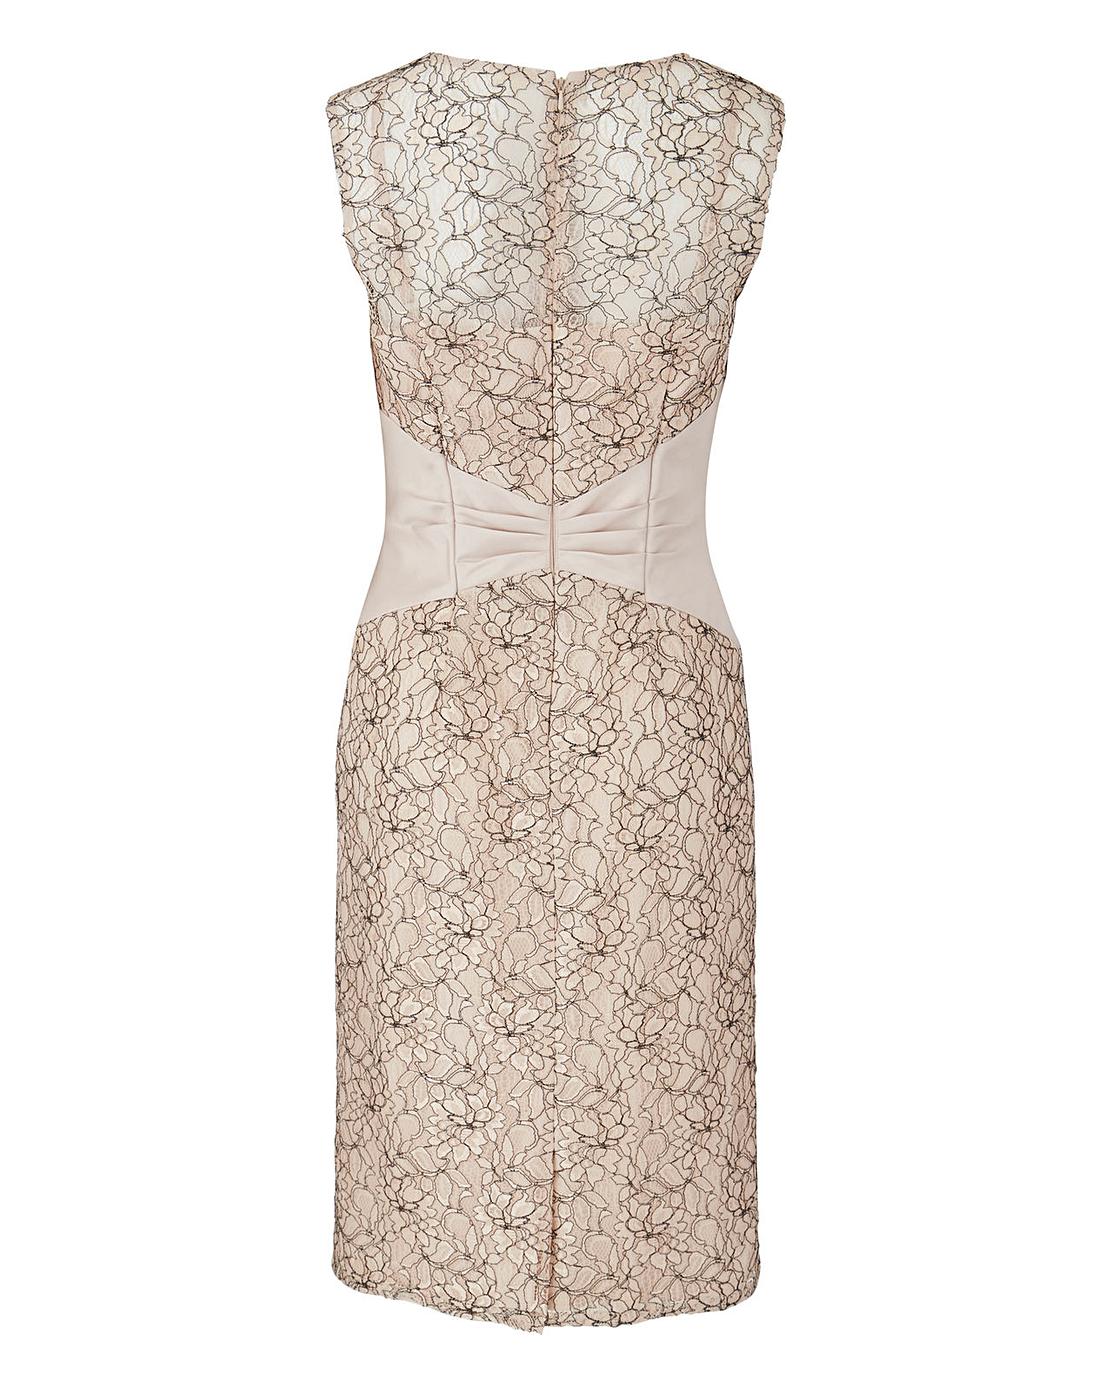 Nightingales Lace Dress and Jacket | J D Williams